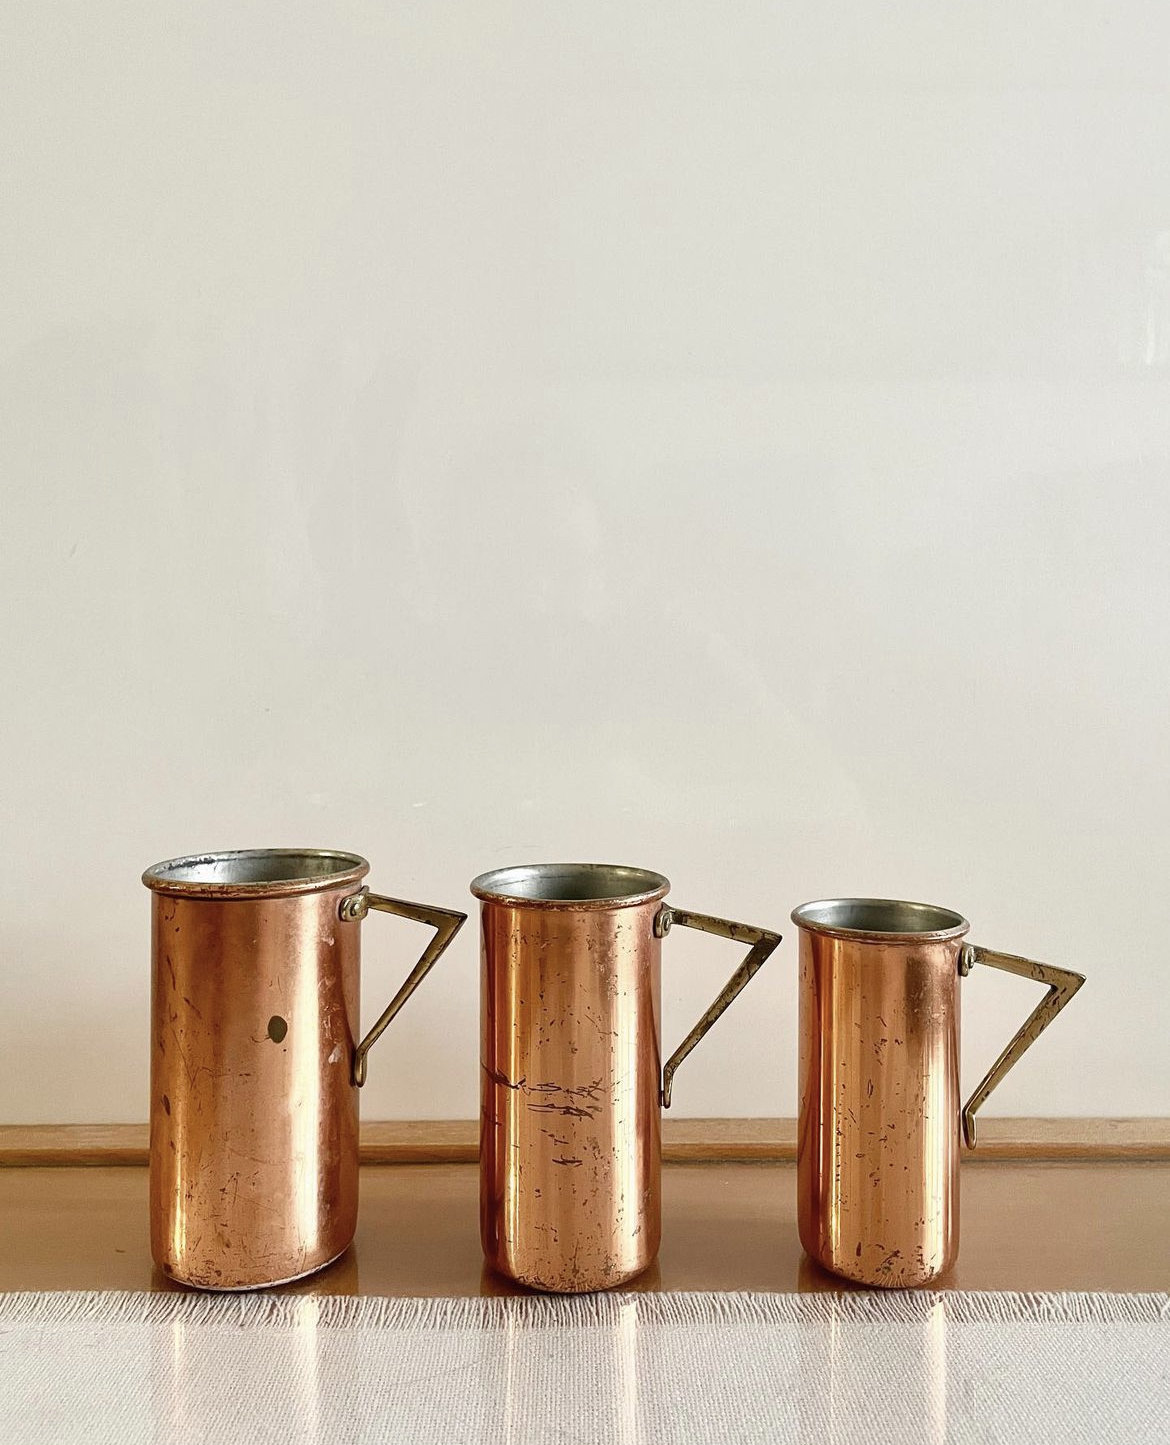 Vintage 5 Piece Copper/Brass Tall Liquid Measuring cups & Wall